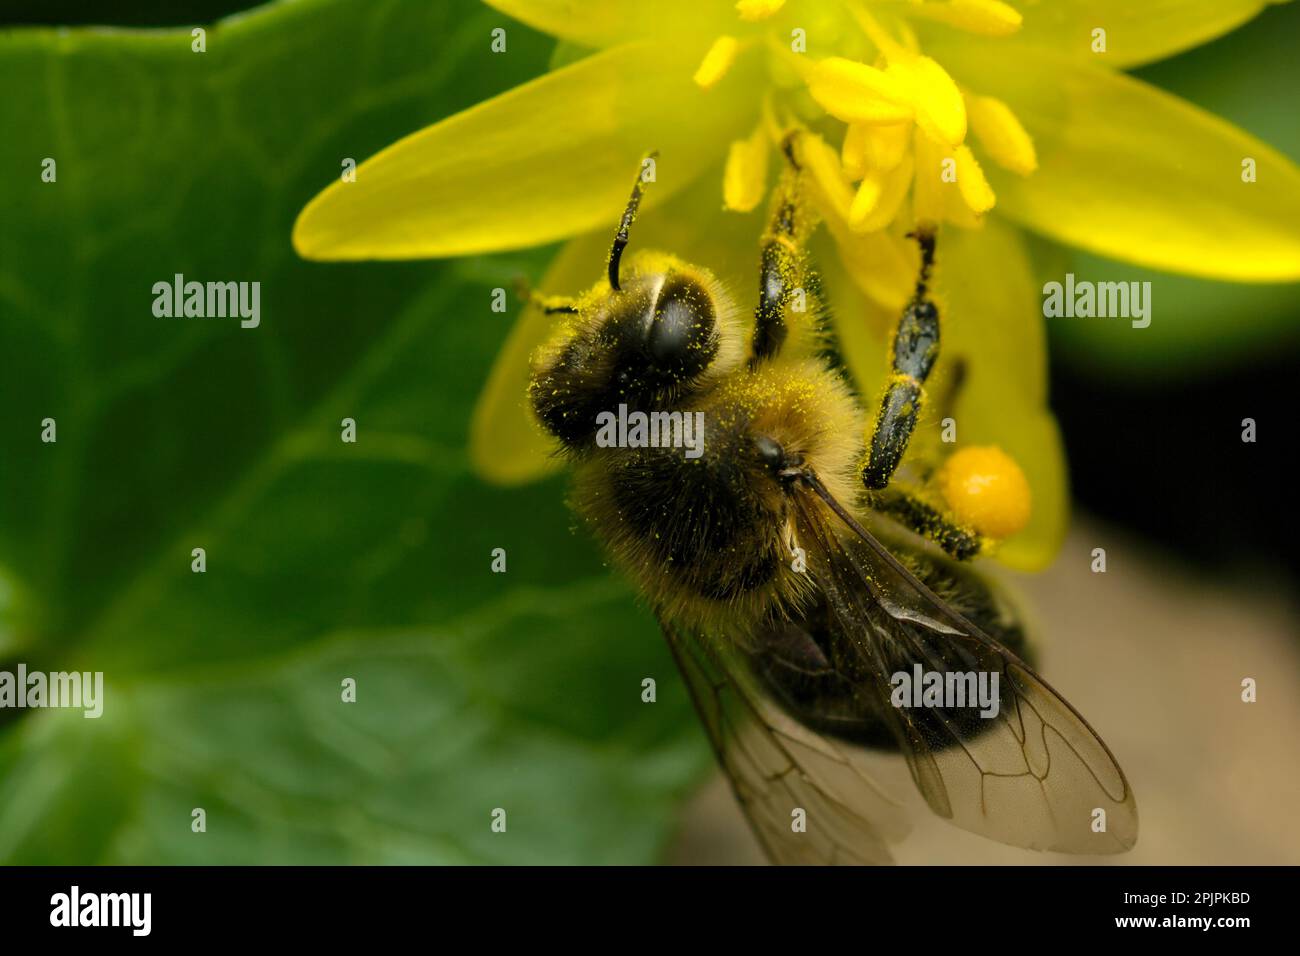 Honey bee (Apis mellifera) on a flower, collecting pollen, macro photography, insects, pollination Stock Photo